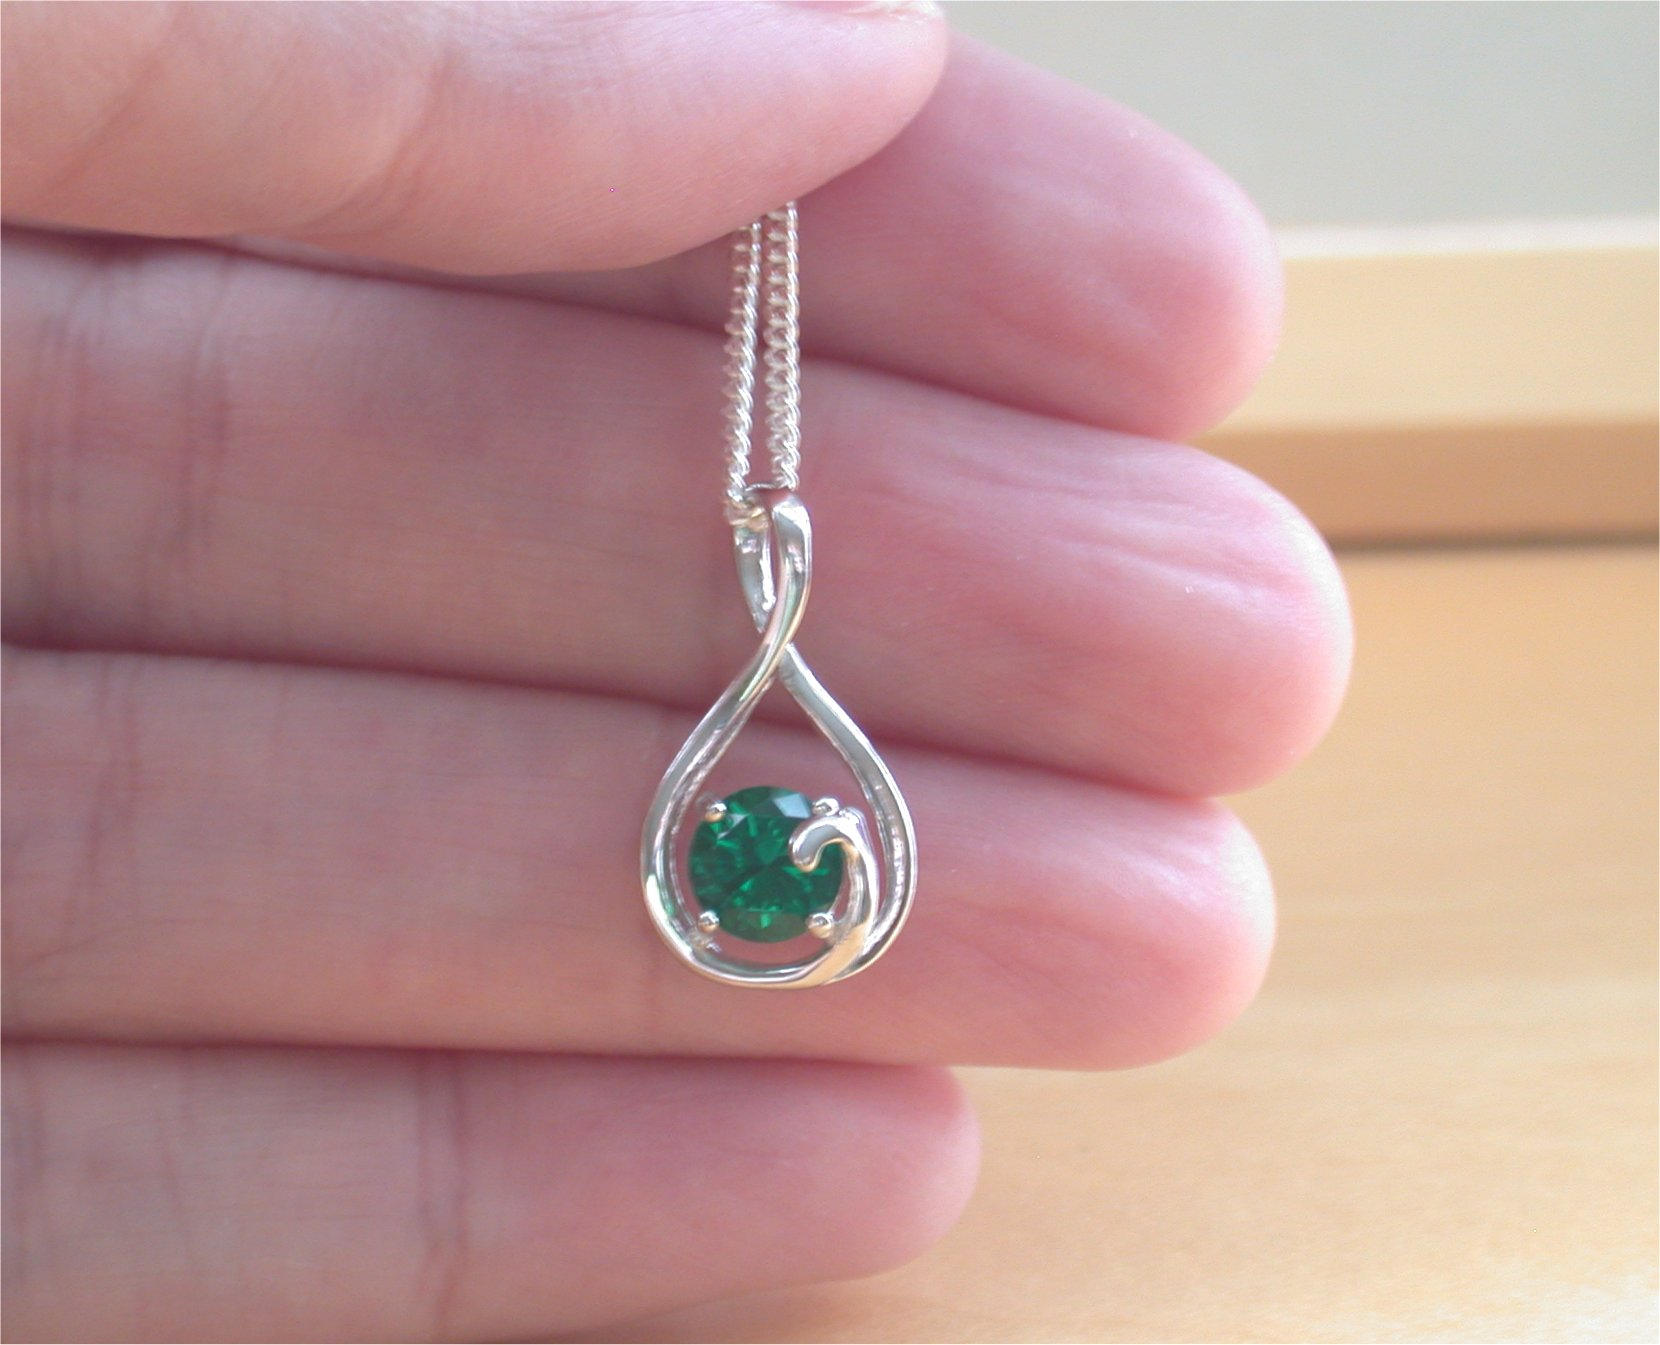 Buy Emerald Green Stone And Diamond Necklace Set In Silver Plated Alloy